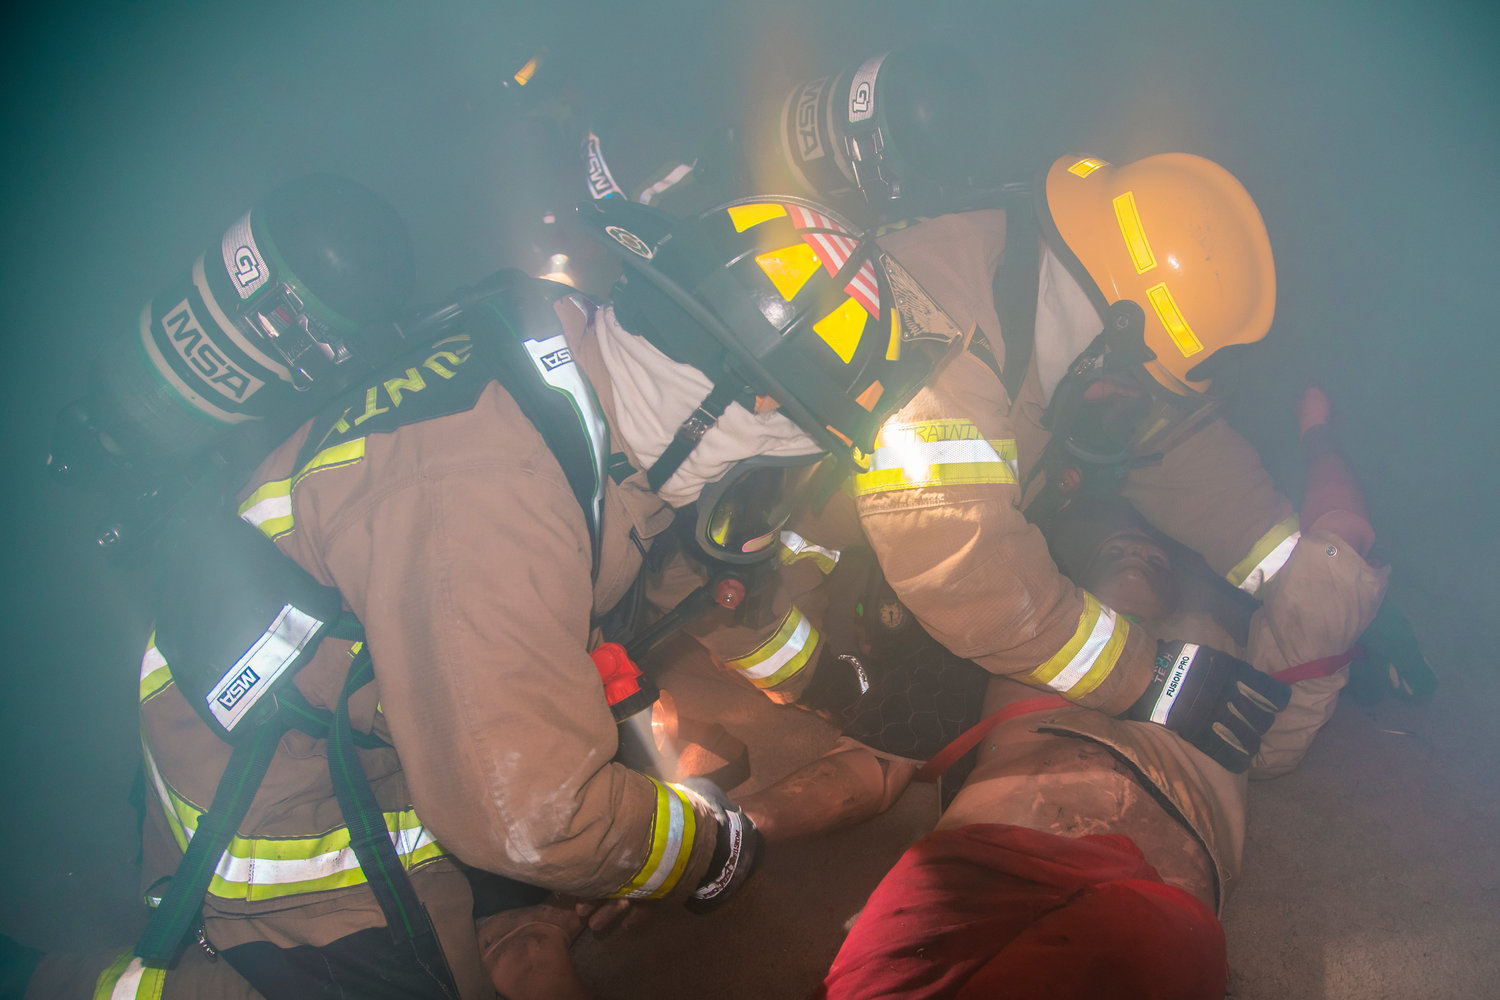 Firefighters trained using a fog machine to help simulate smoke. The building was also darkened to create a more realistic exercise for firefighters.